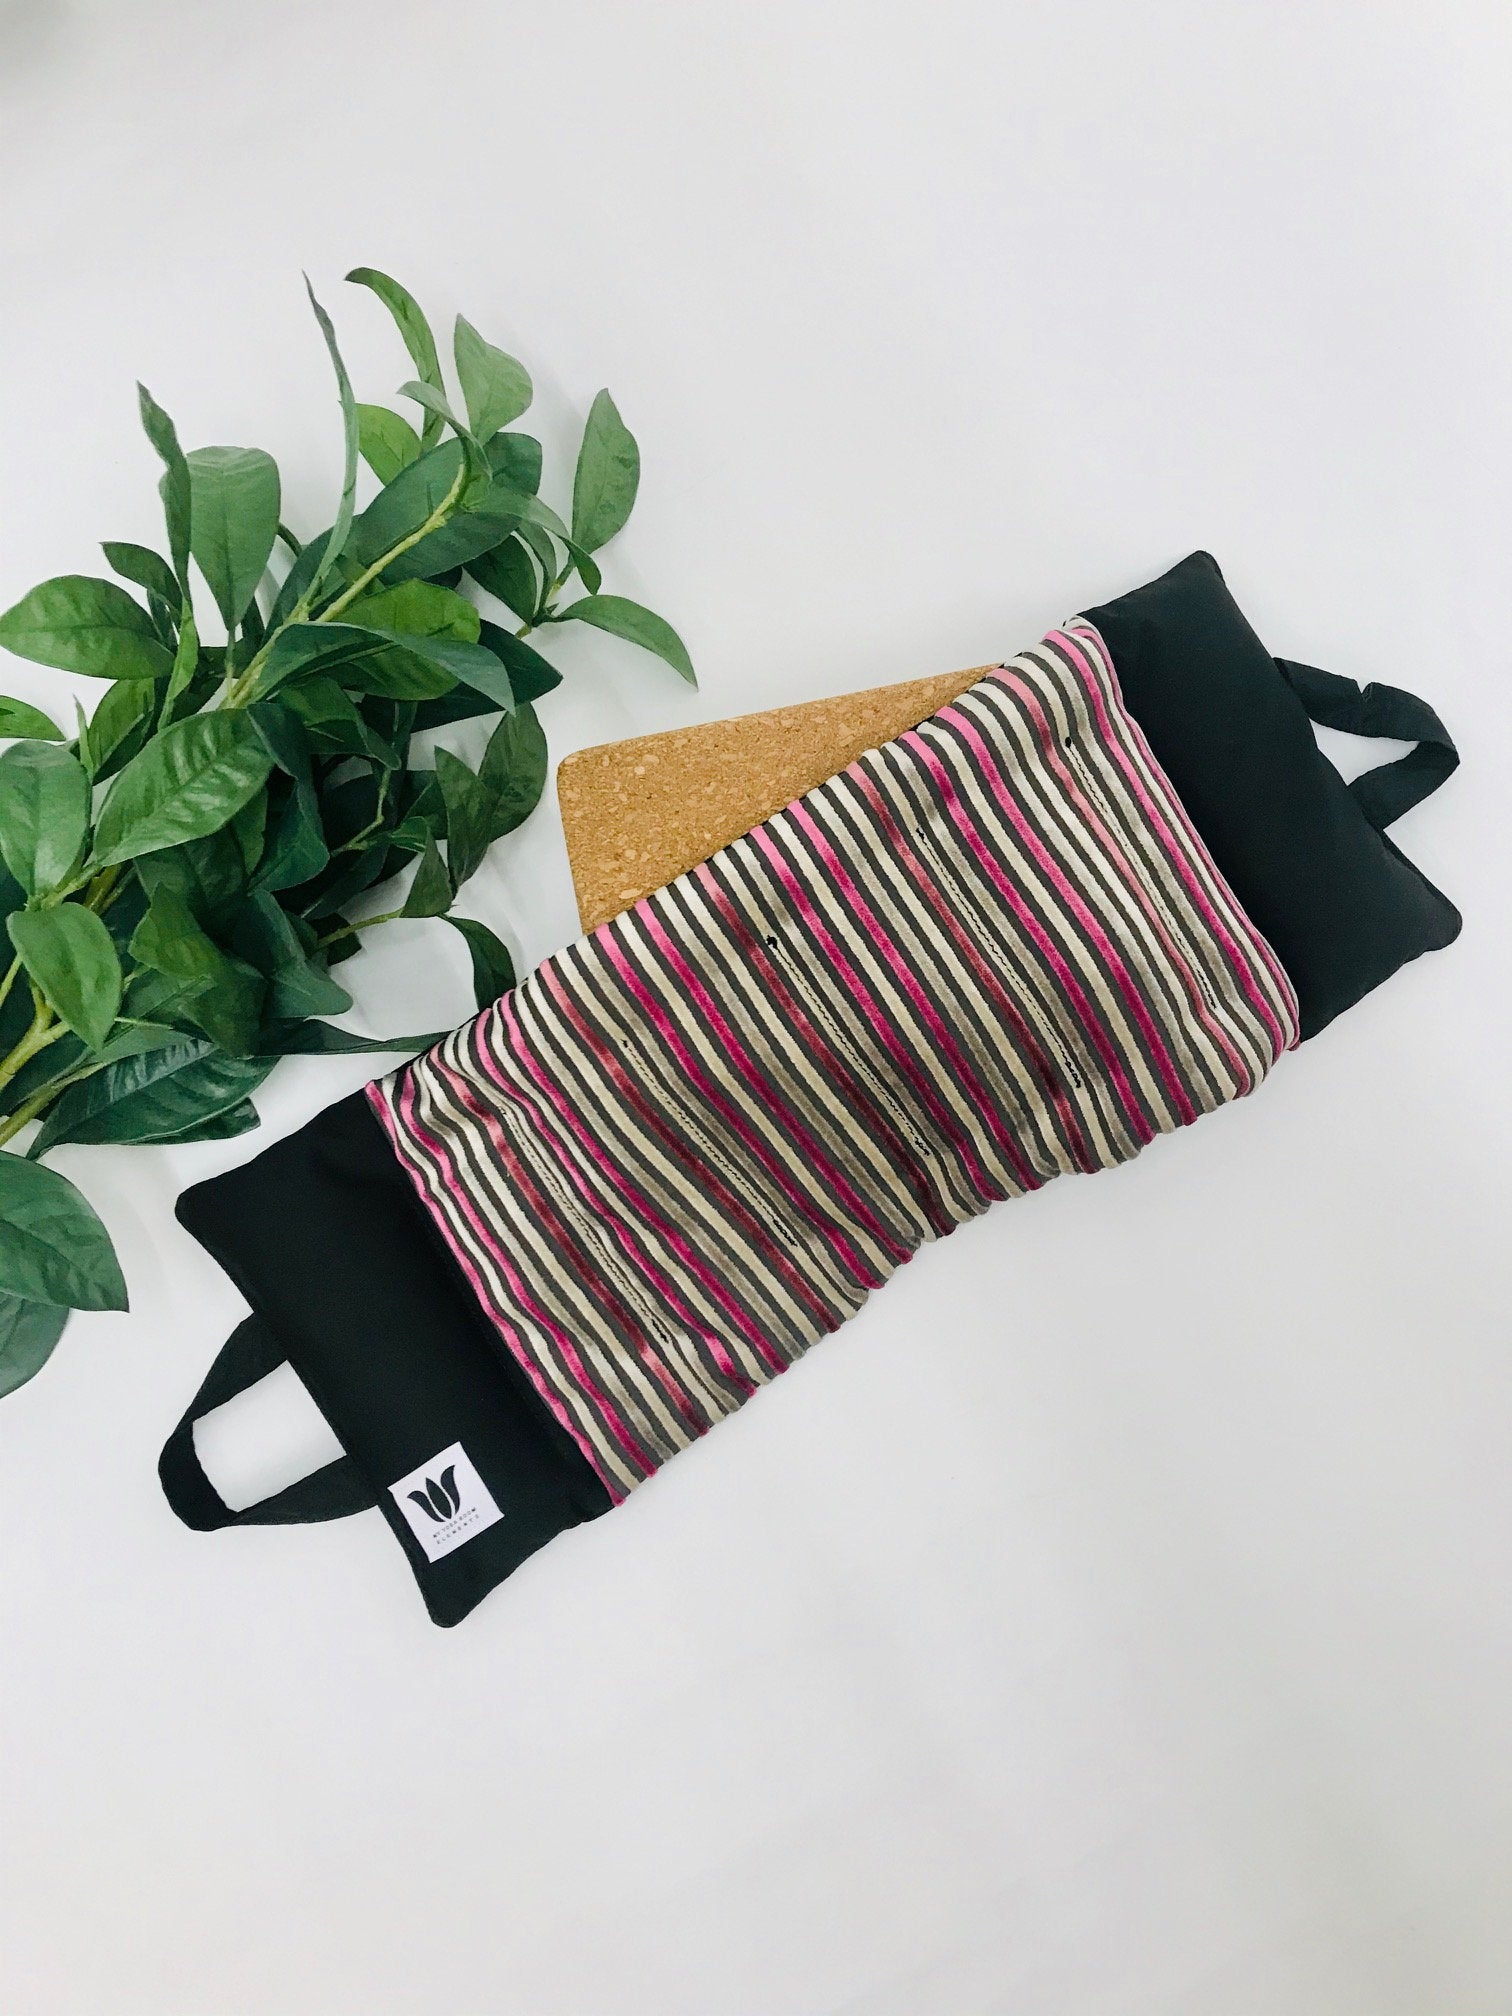 Yoga Sandbag version by My Yoga Room Elements. Add grounding to your practice with this heatable yoga prop. Handcrafted in Calgary in plush striped fabric.